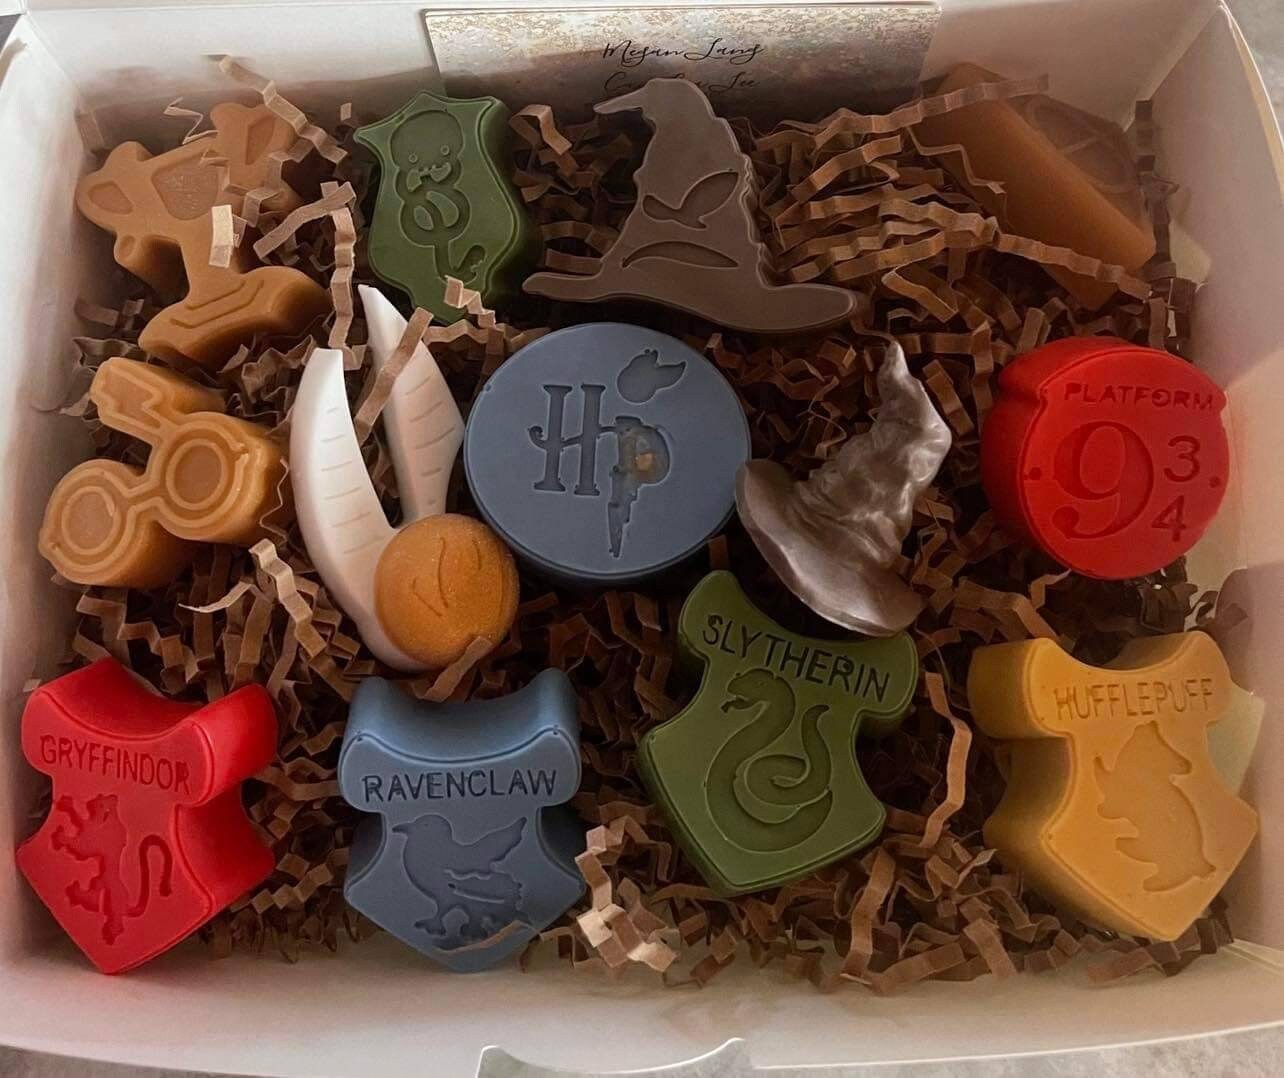 Body Haven Soaps - Harry Potter Inspired Soap 🪄creations inspired by the  Harry Potter sega !! Wizard soapery  hand Made soap dough embeds  #harrypotter #harrypottersoap #creativesoap #soaps #soap #soapmaking  #handmade #soapmaker #